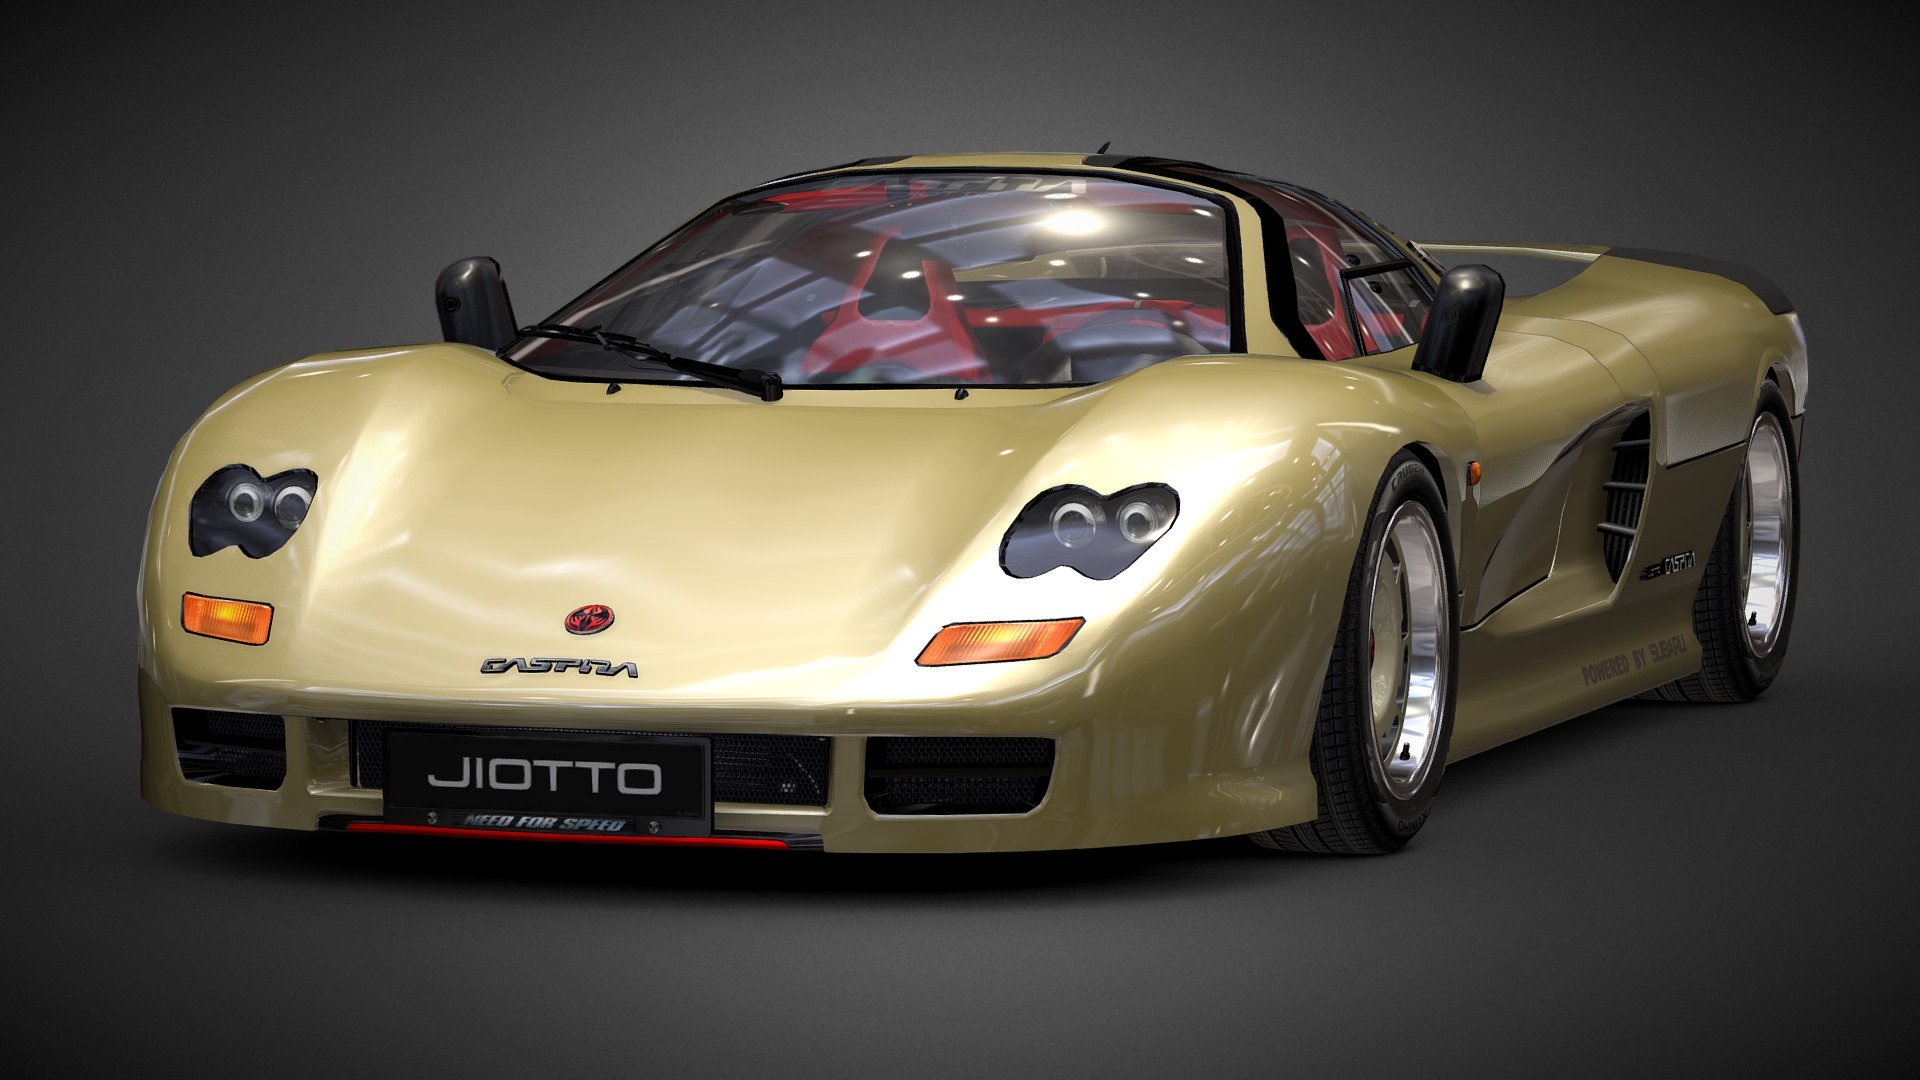 This car is one of the rarest Japanese supercars of the 90s.


I tried to give to this lowpoly model the second life,

and to make this car more beautiful.

now I shared it with you



ALLOWED use this model -

for games.

visual and art projects.

presentations.

(with showing my credits)



FORBIDDEN -

sell.

make a profit with it.

assign their authorship.

upload on other sites.

reupload on SketchFab.



You can also watch wonderful works with my Jiotto Caspita

Work by Patrice TERRIER

https://www.behance.net/gallery/151526759/Jiotto-Caspita?tracking_source=for_you_feed_user_published


Work by Anderson Mancini

https://webflow.com/made-in-webflow/website/jiotto-webgi


YouTube by 幻想レースゲー資料館

https://www.youtube.com/watch?v=IztIIX0q5mw
 - Jiotto Caspita F1 Road Car 1989 By Alex.Ka 3d model